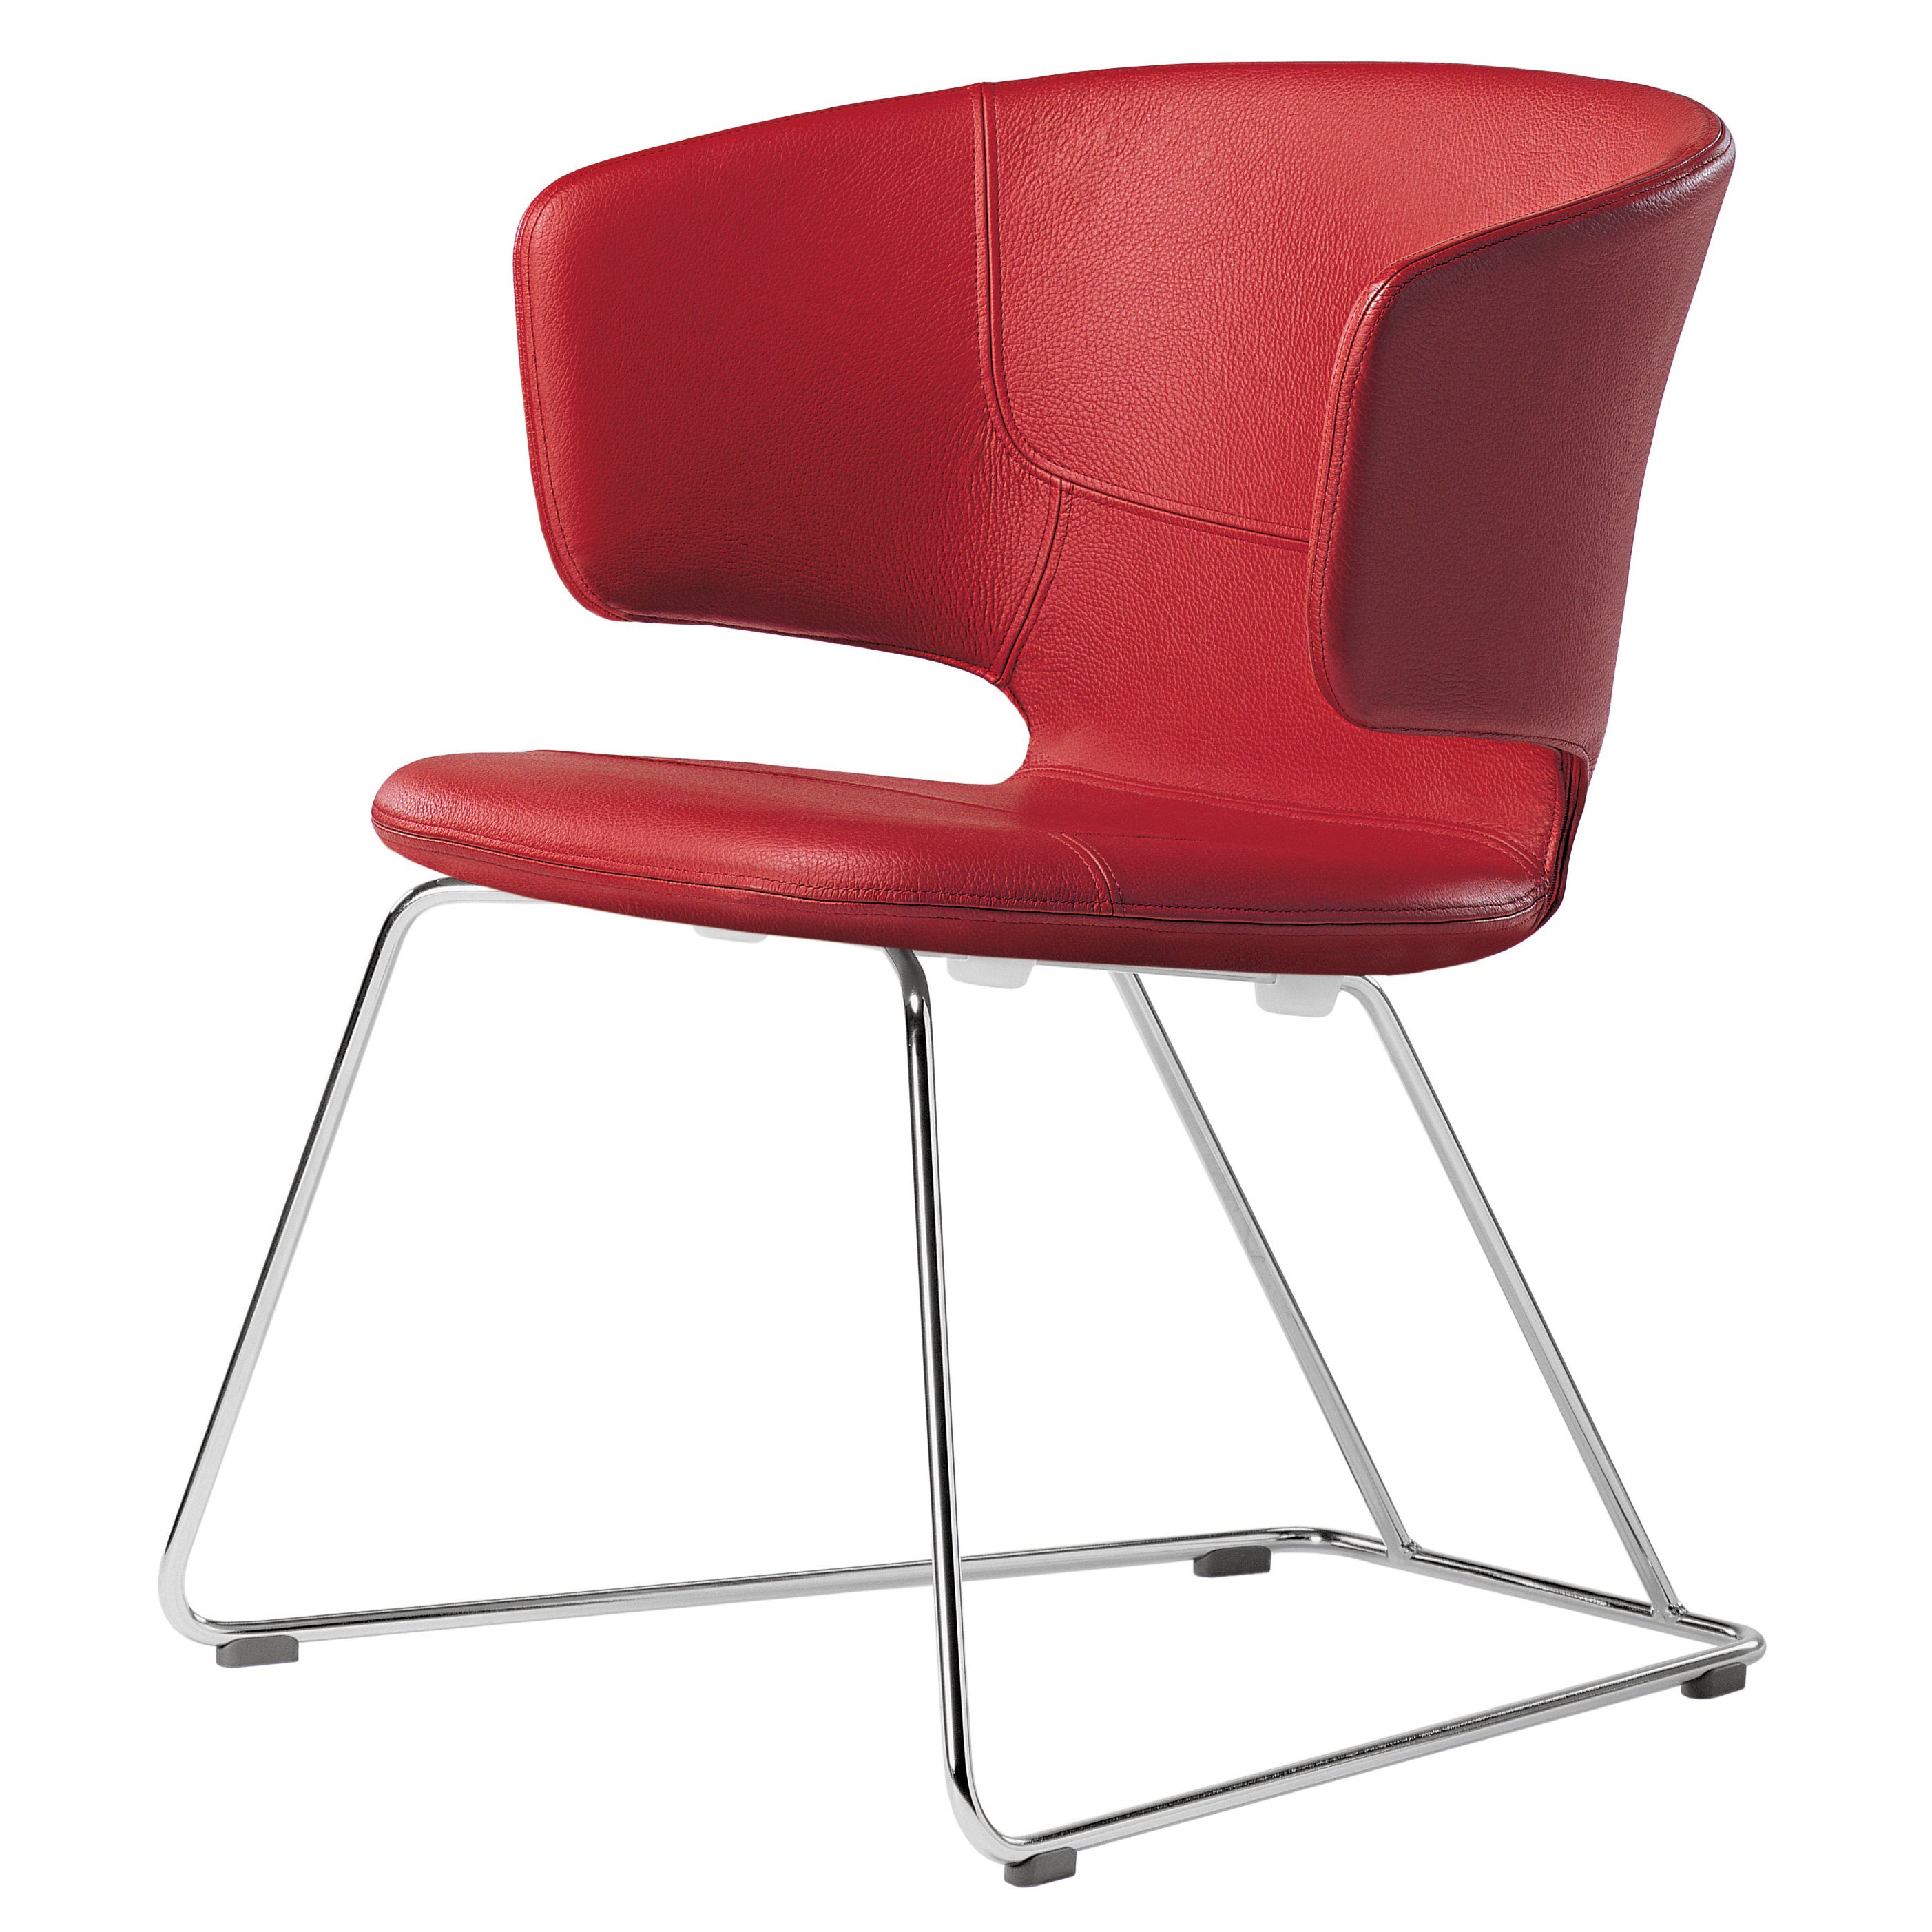 Alias 504 Taormina Sledge Chair in Red Leather and Chromed Steel Frame